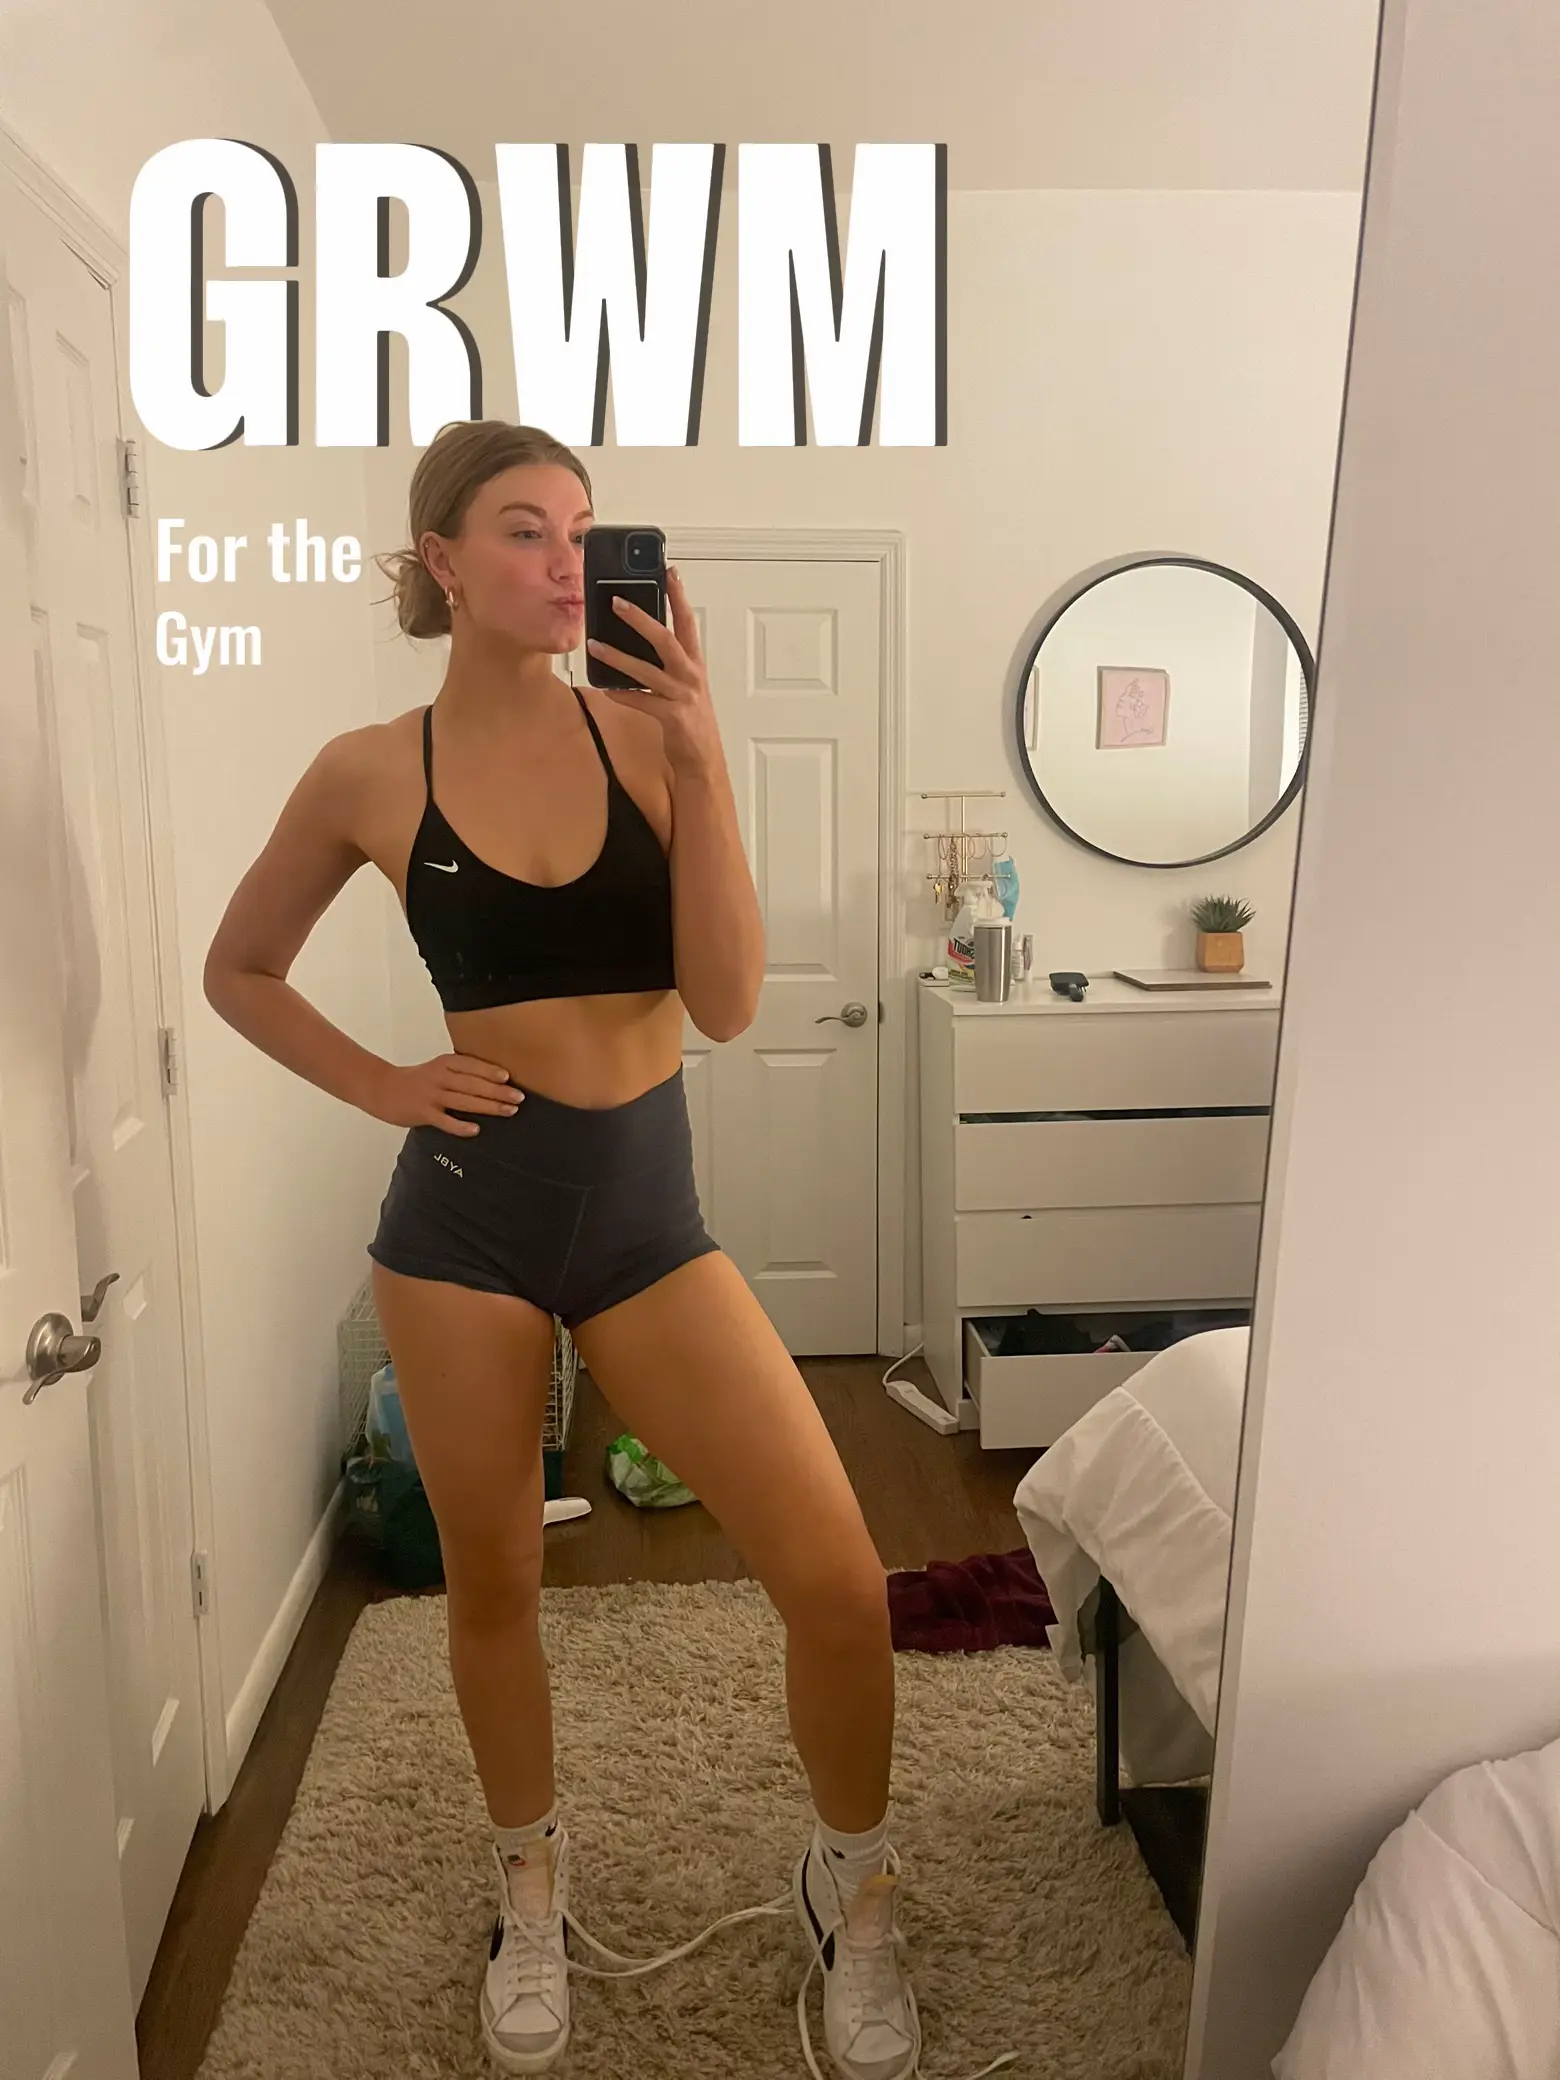 Gym GRWM, Gallery posted by kbedfitness